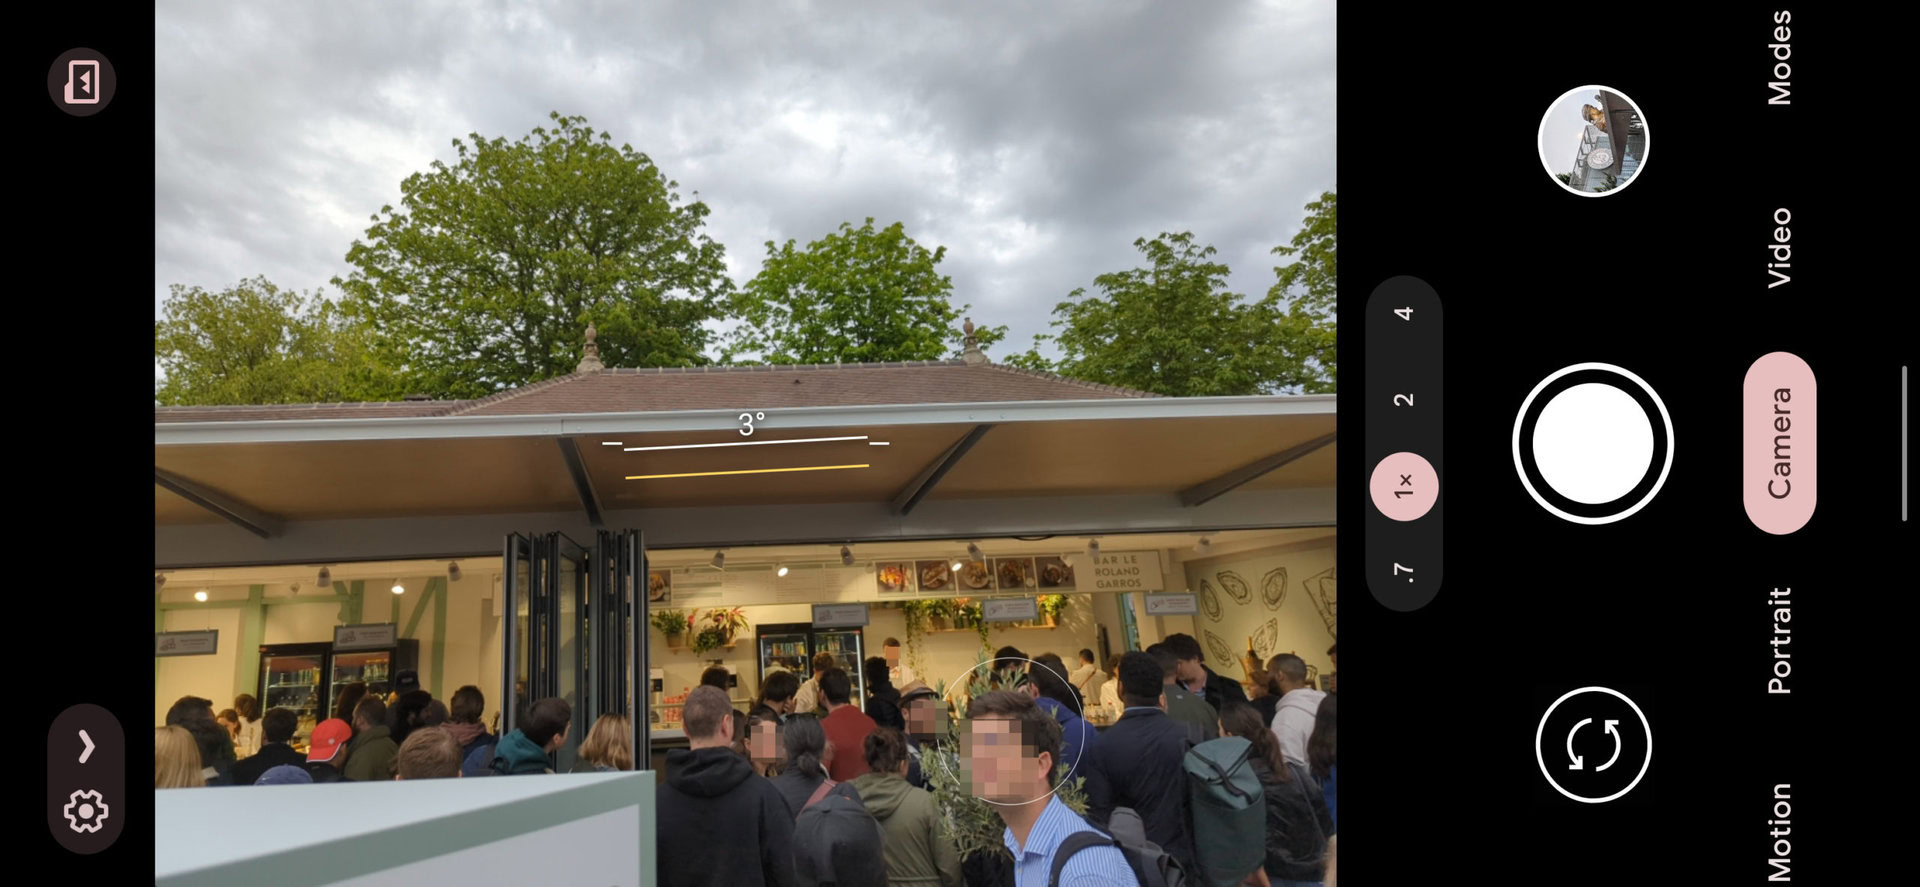 Screenshot of the Google Pixel 6 Pro camera at 1x shows a grocery store with a long line.